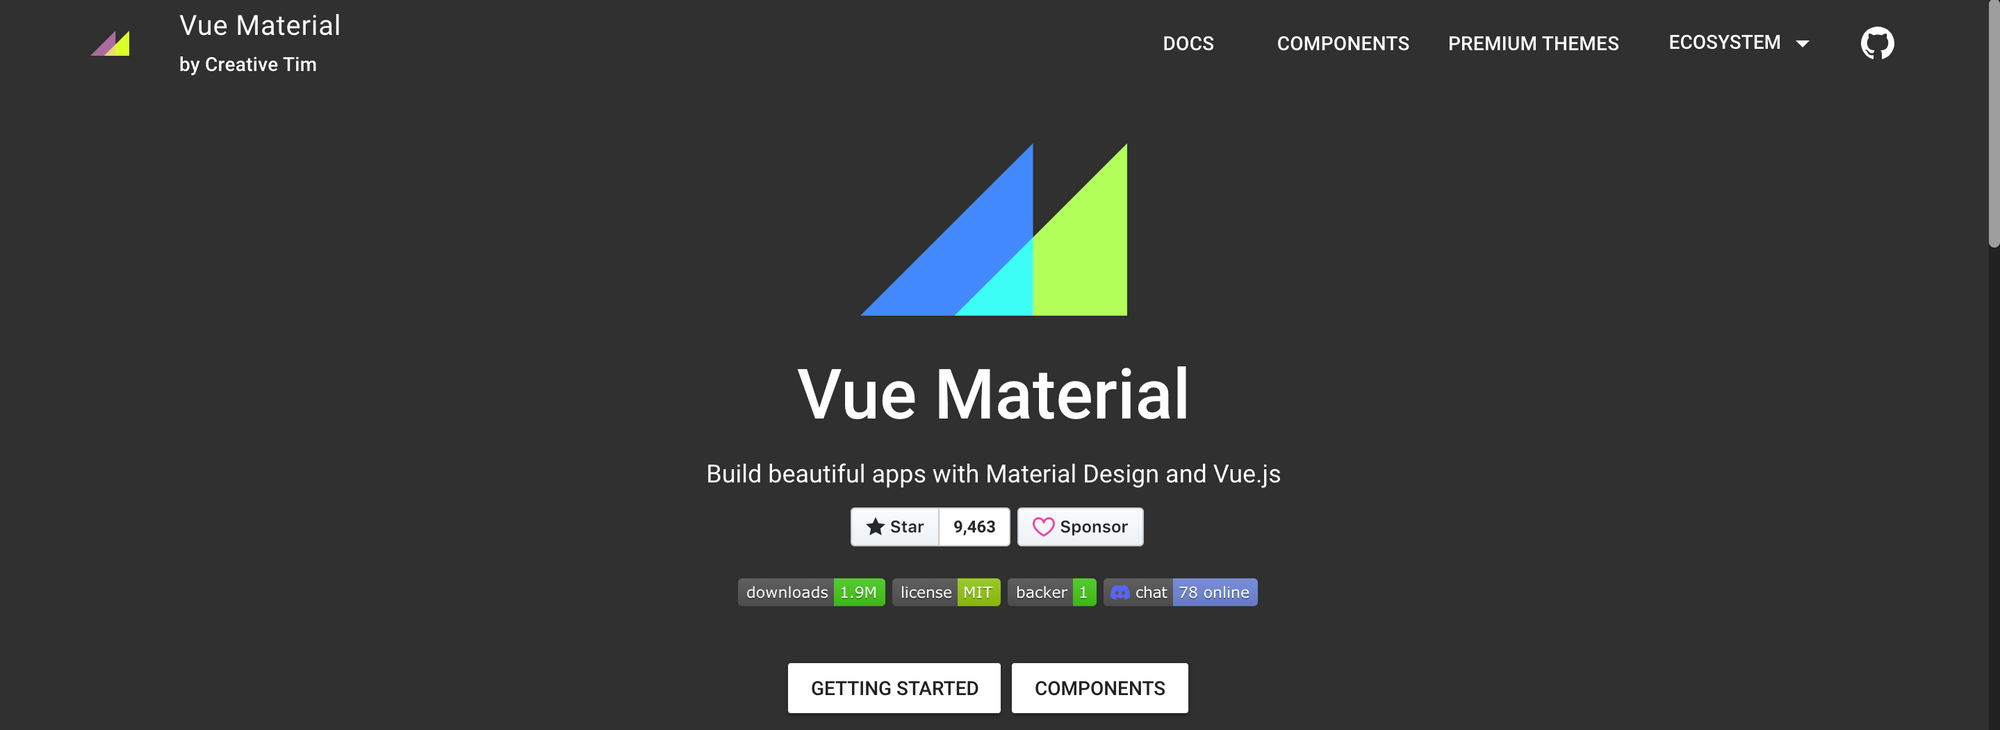 Vue Material is now part of the Creative Tim family